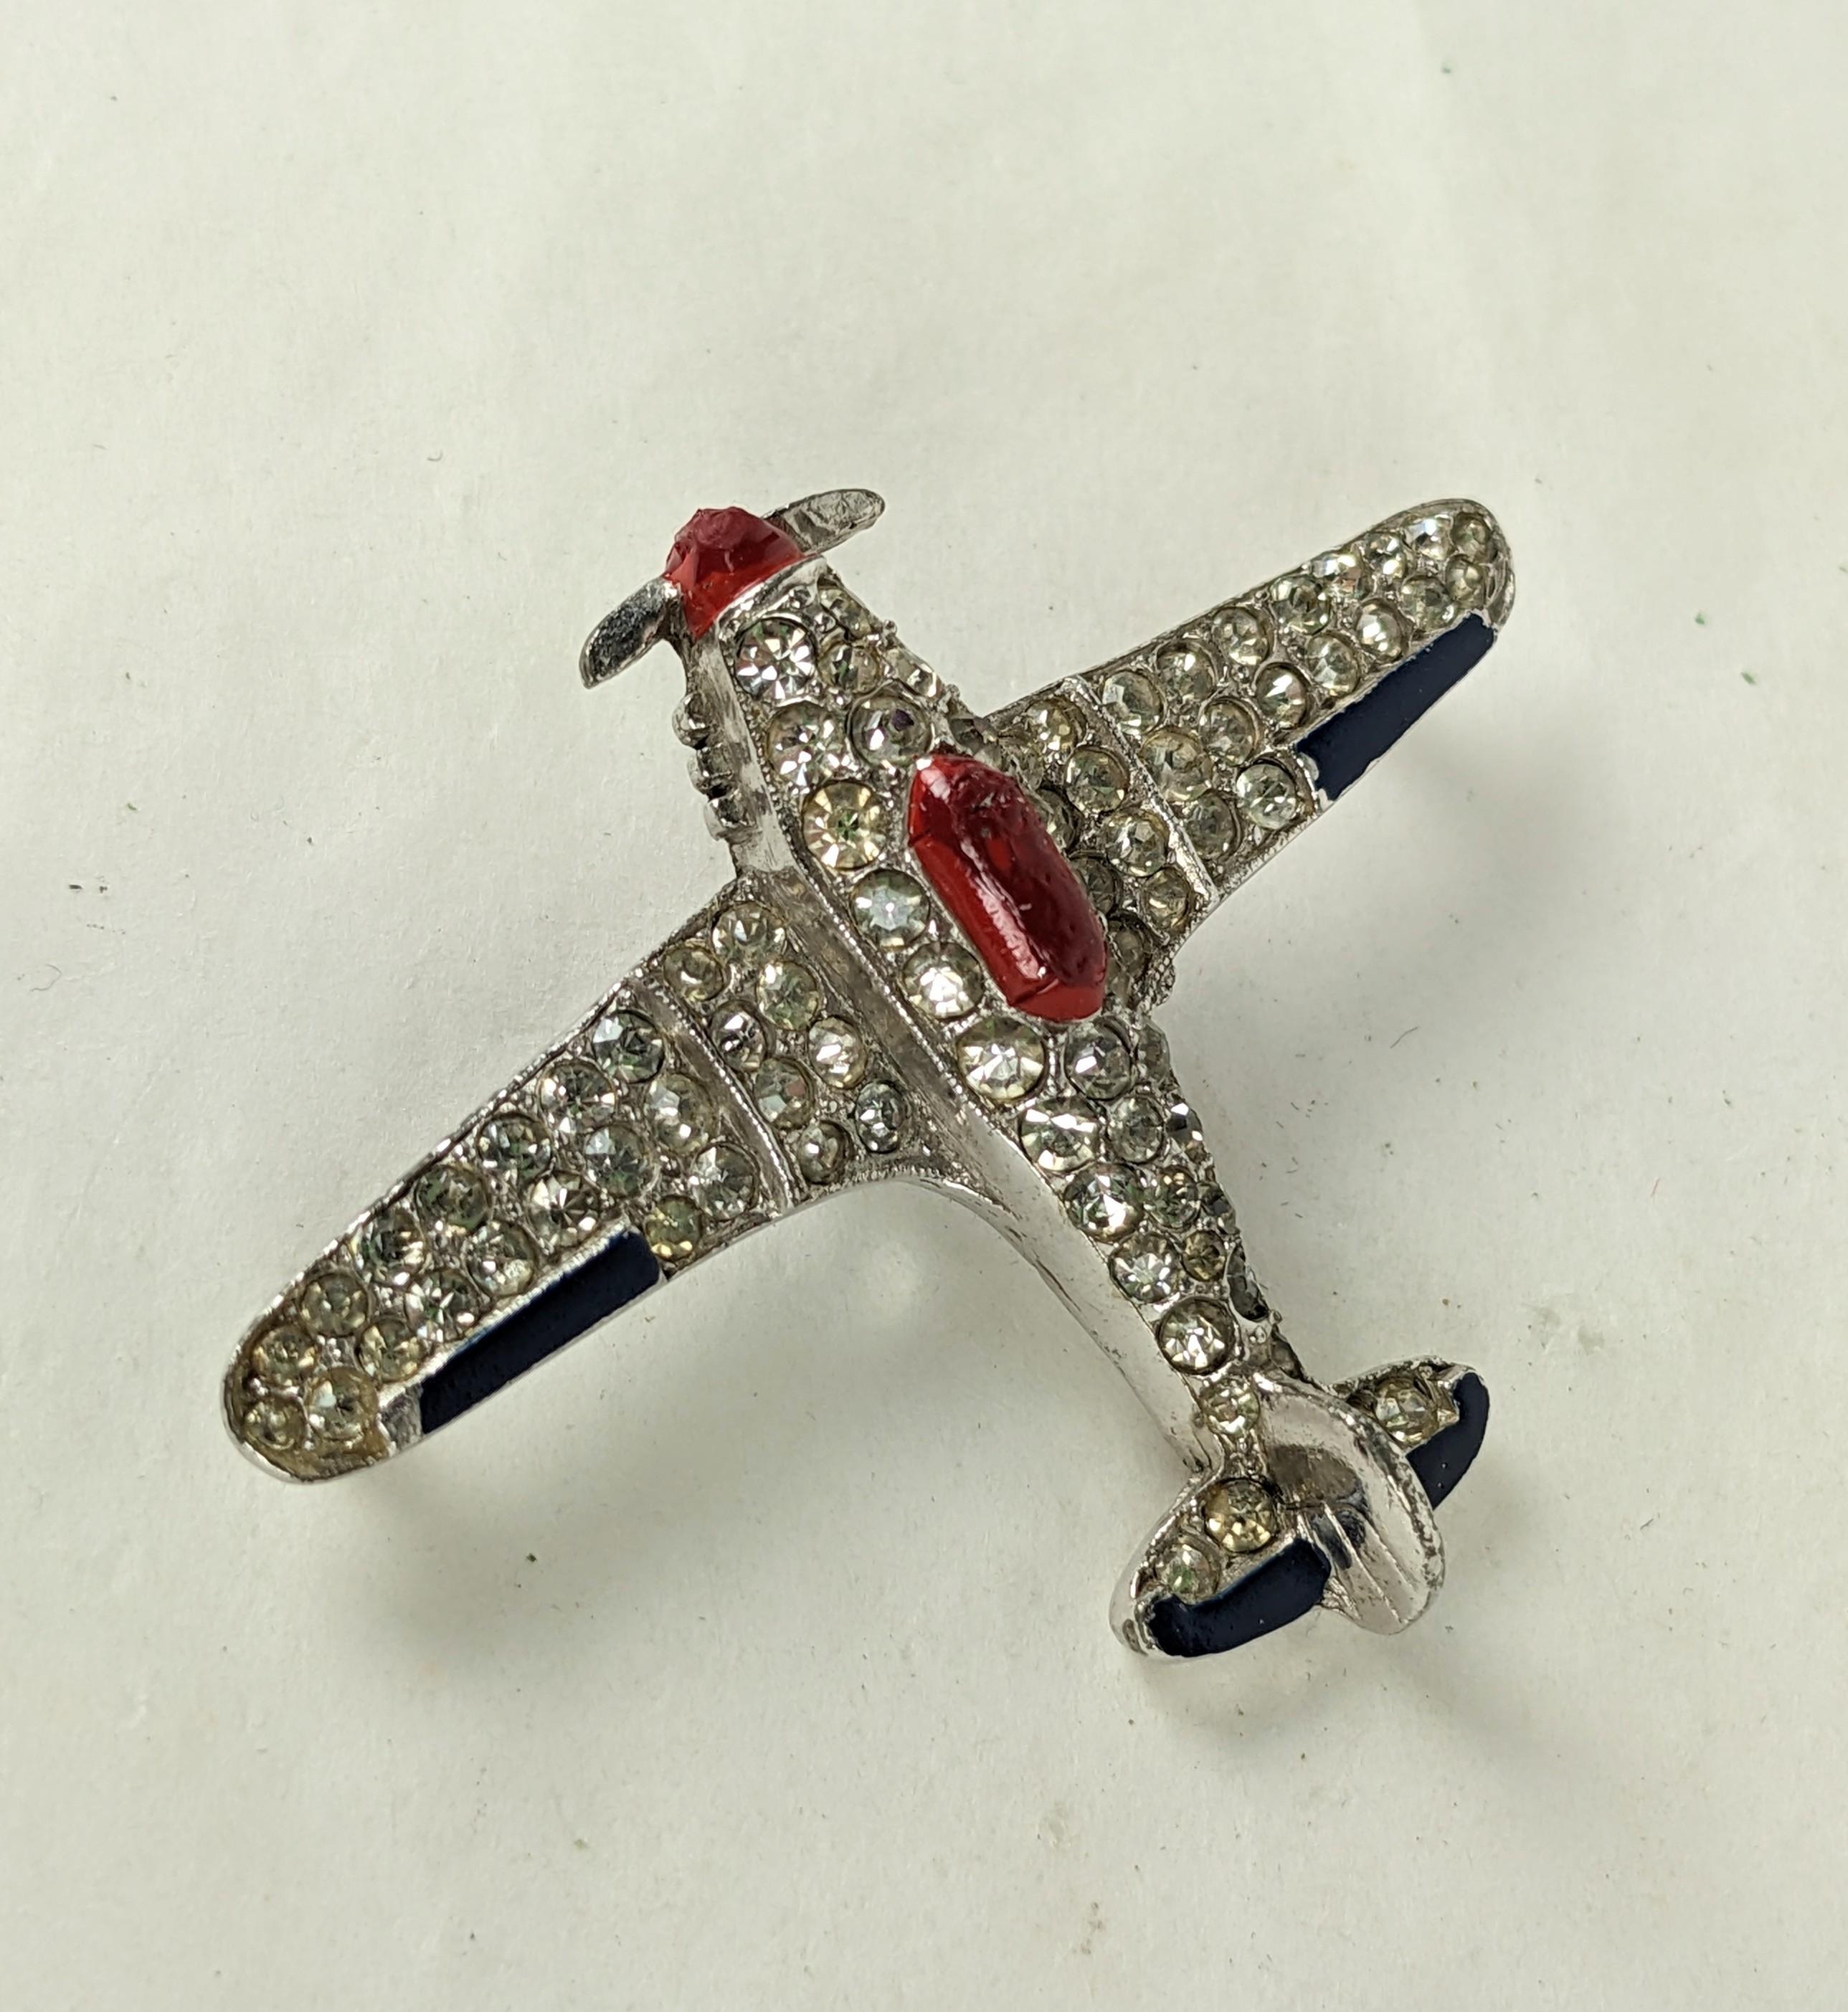 Trifari Art Deco Pave and Enamel Plane, Alfred Phillipe from the 1930's. Rhodium finish with pave crystals and and enamel accents, 1930's USA. Signed. 